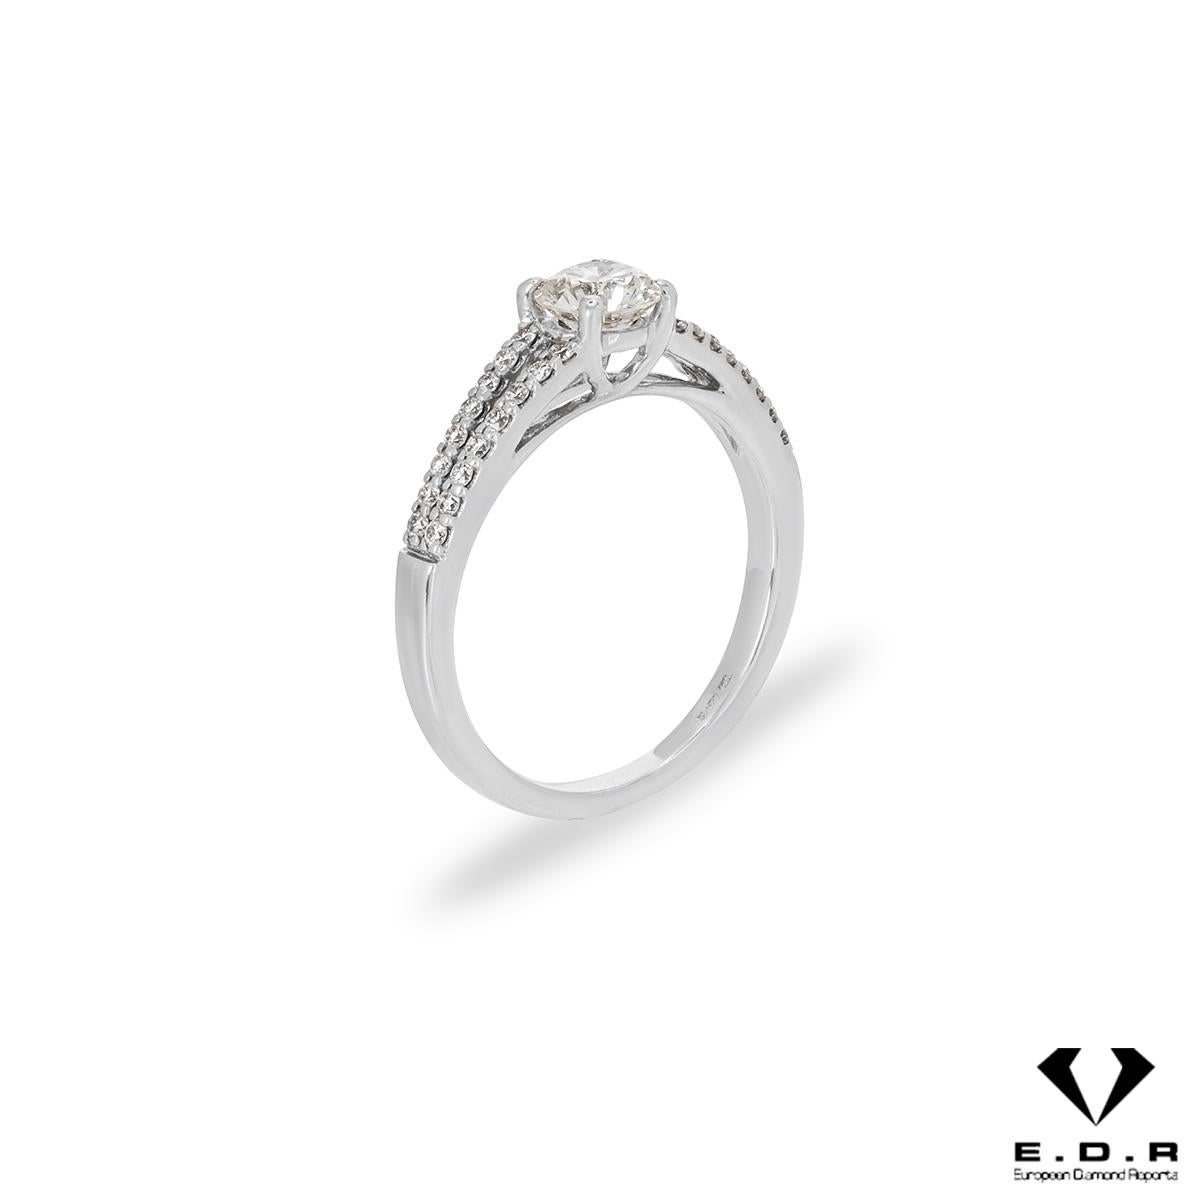 A unique 18k white gold diamond engagement ring. The ring features a round brilliant cut diamond set to the centre in a four prong mount weighing 0.51ct, H colour and VS1 clarity. The centre diamond is further complemented by a split shank pave set